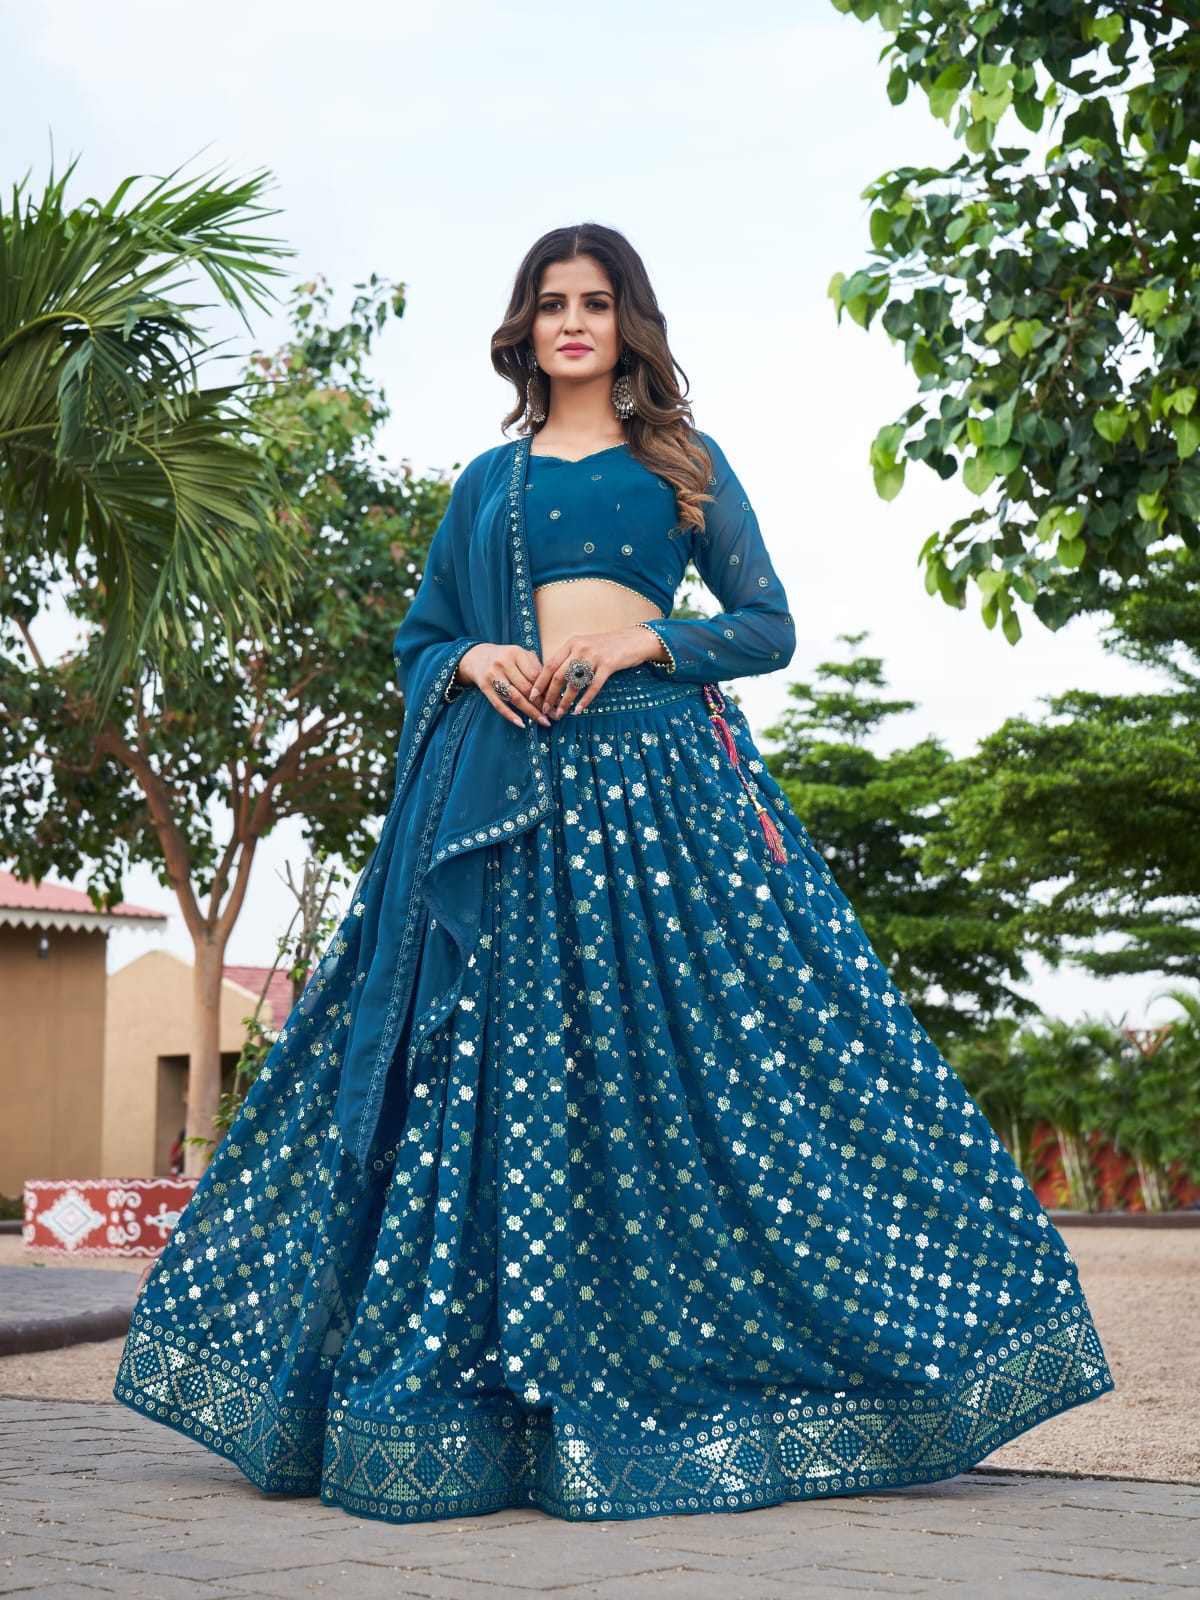 Latest Indian Ethnic Designer Lehenga Style Sarees and Lehenga Choli  Collection Online Shopping with Discount Offer | Online Women's Clothing  Shopping Site